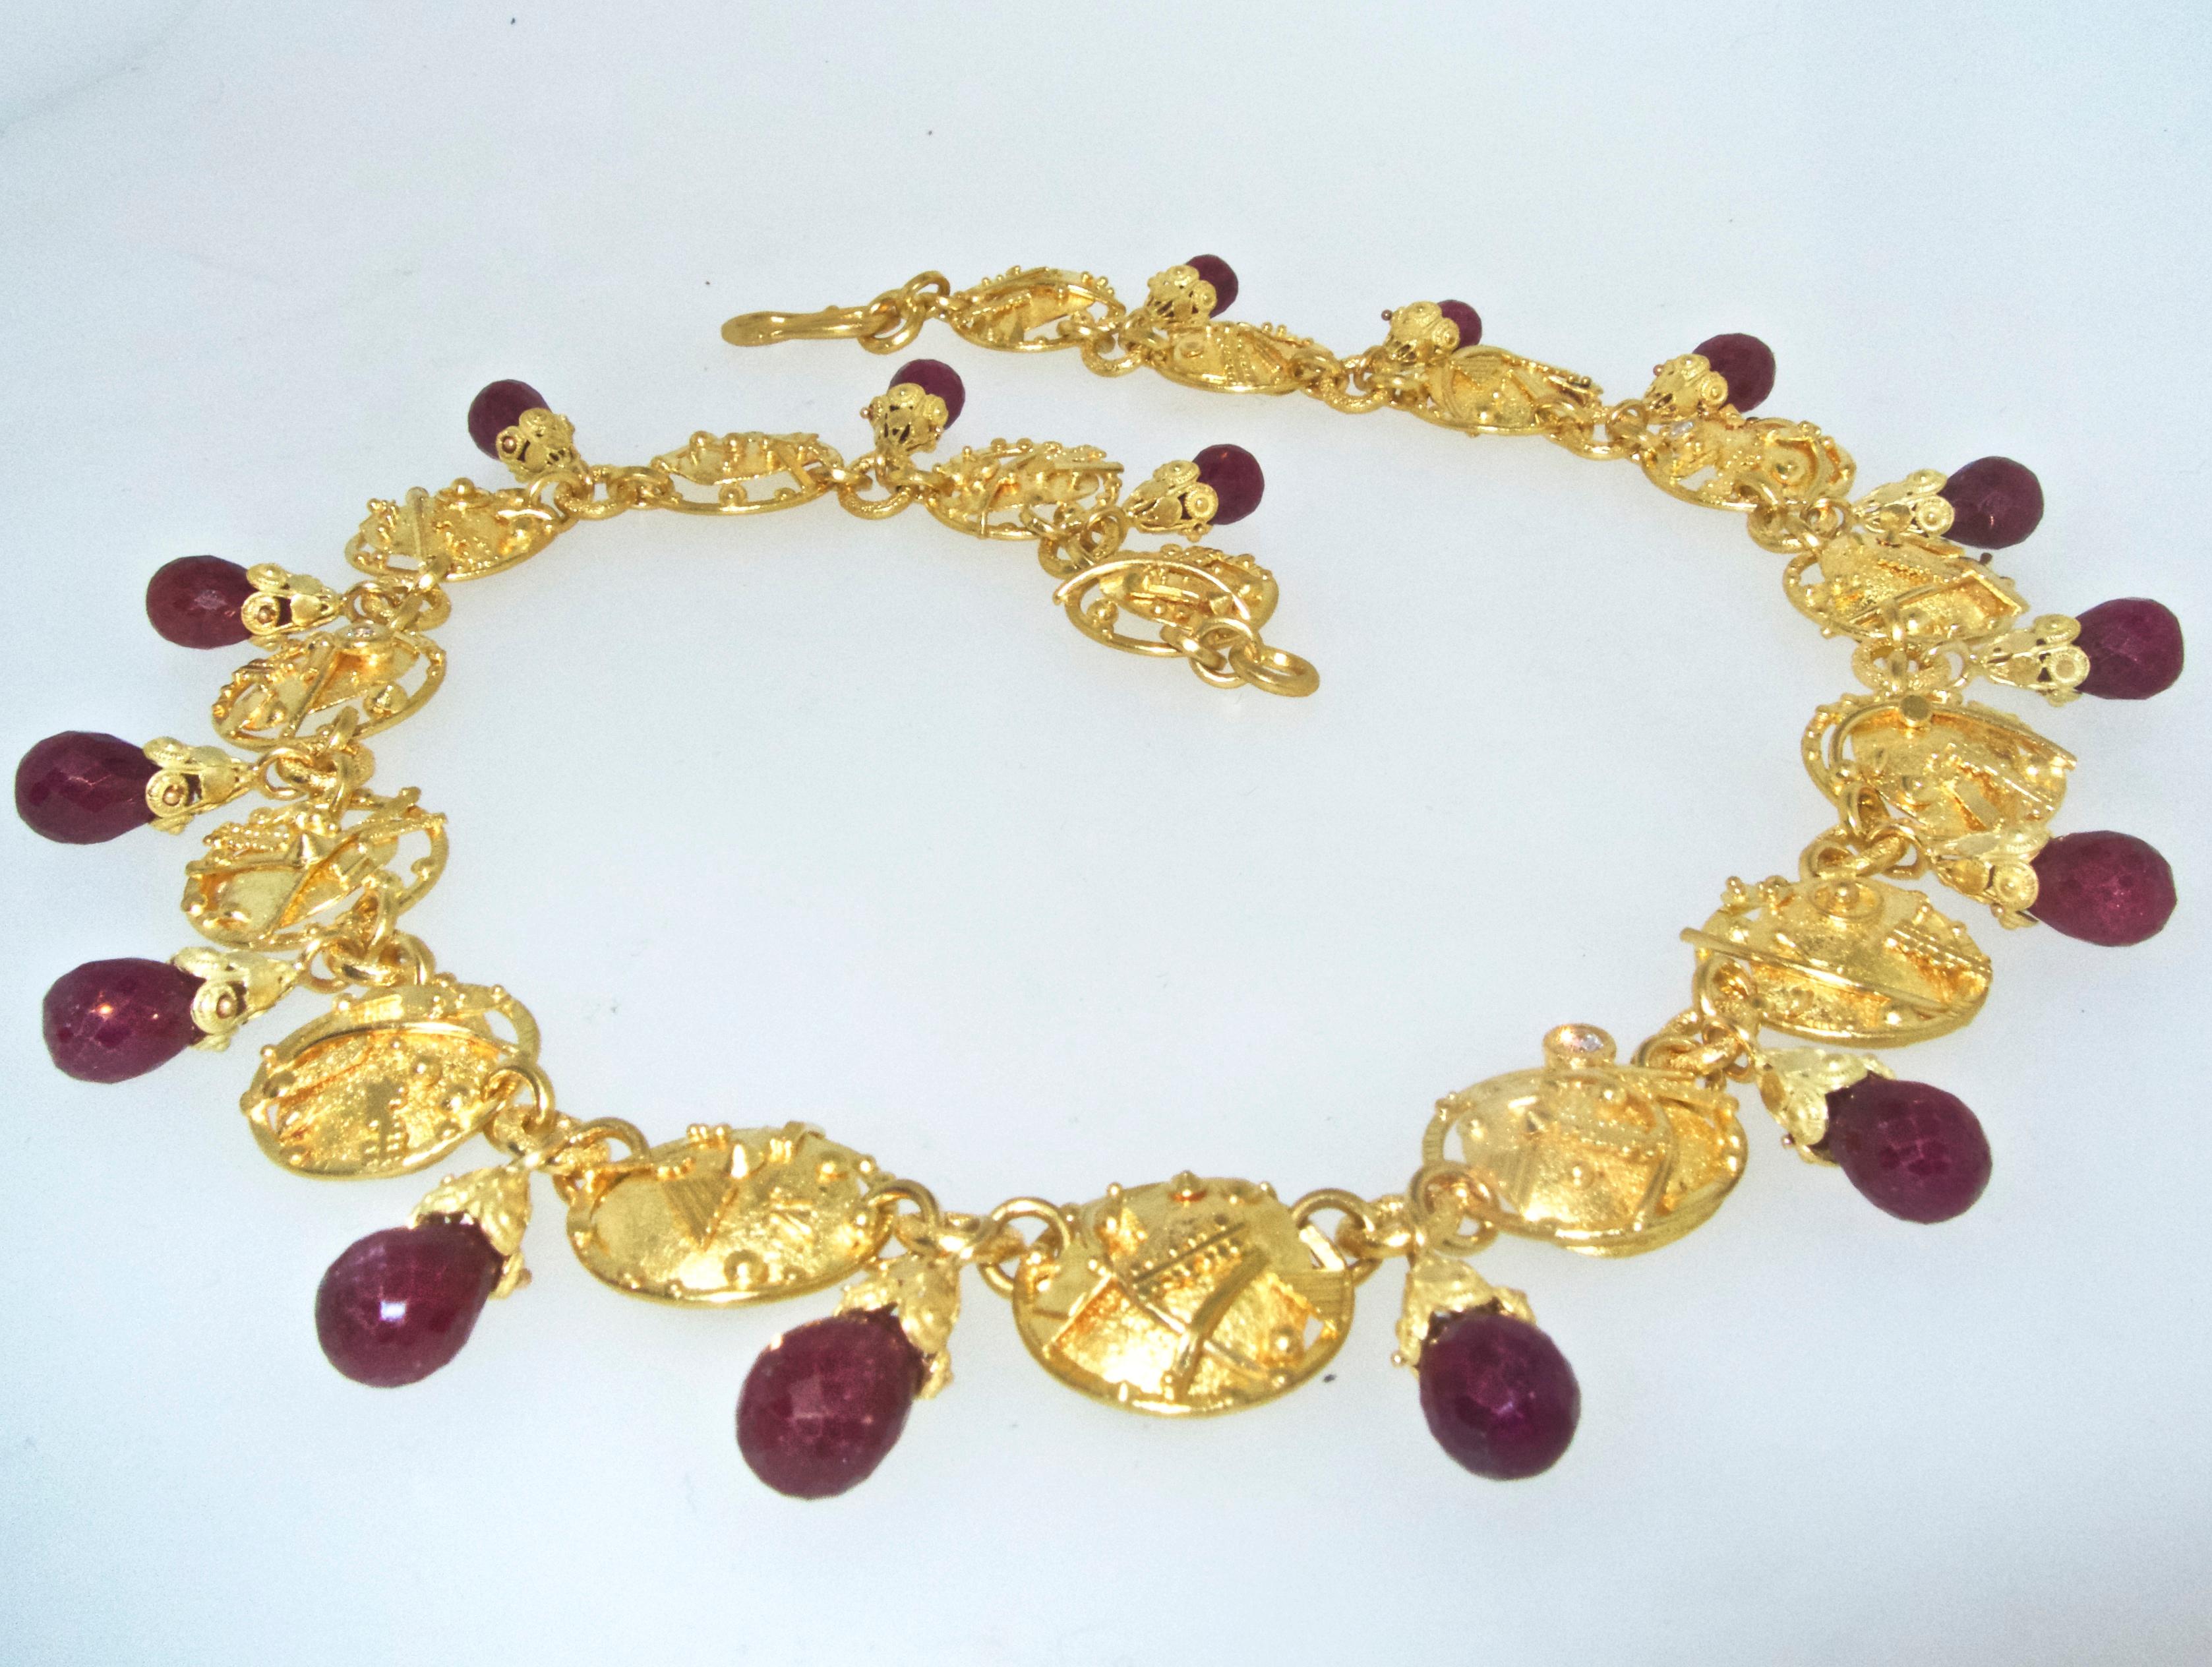   Gold necklace, 22k, with hanging faceted tear drop red opaque natural, rubies, small diamonds,  17 inches in length and 124.92 grams.  Signed JB, possibly for Jonathan Bailey, this necklace was certainly done by an avant garde artist, the gold